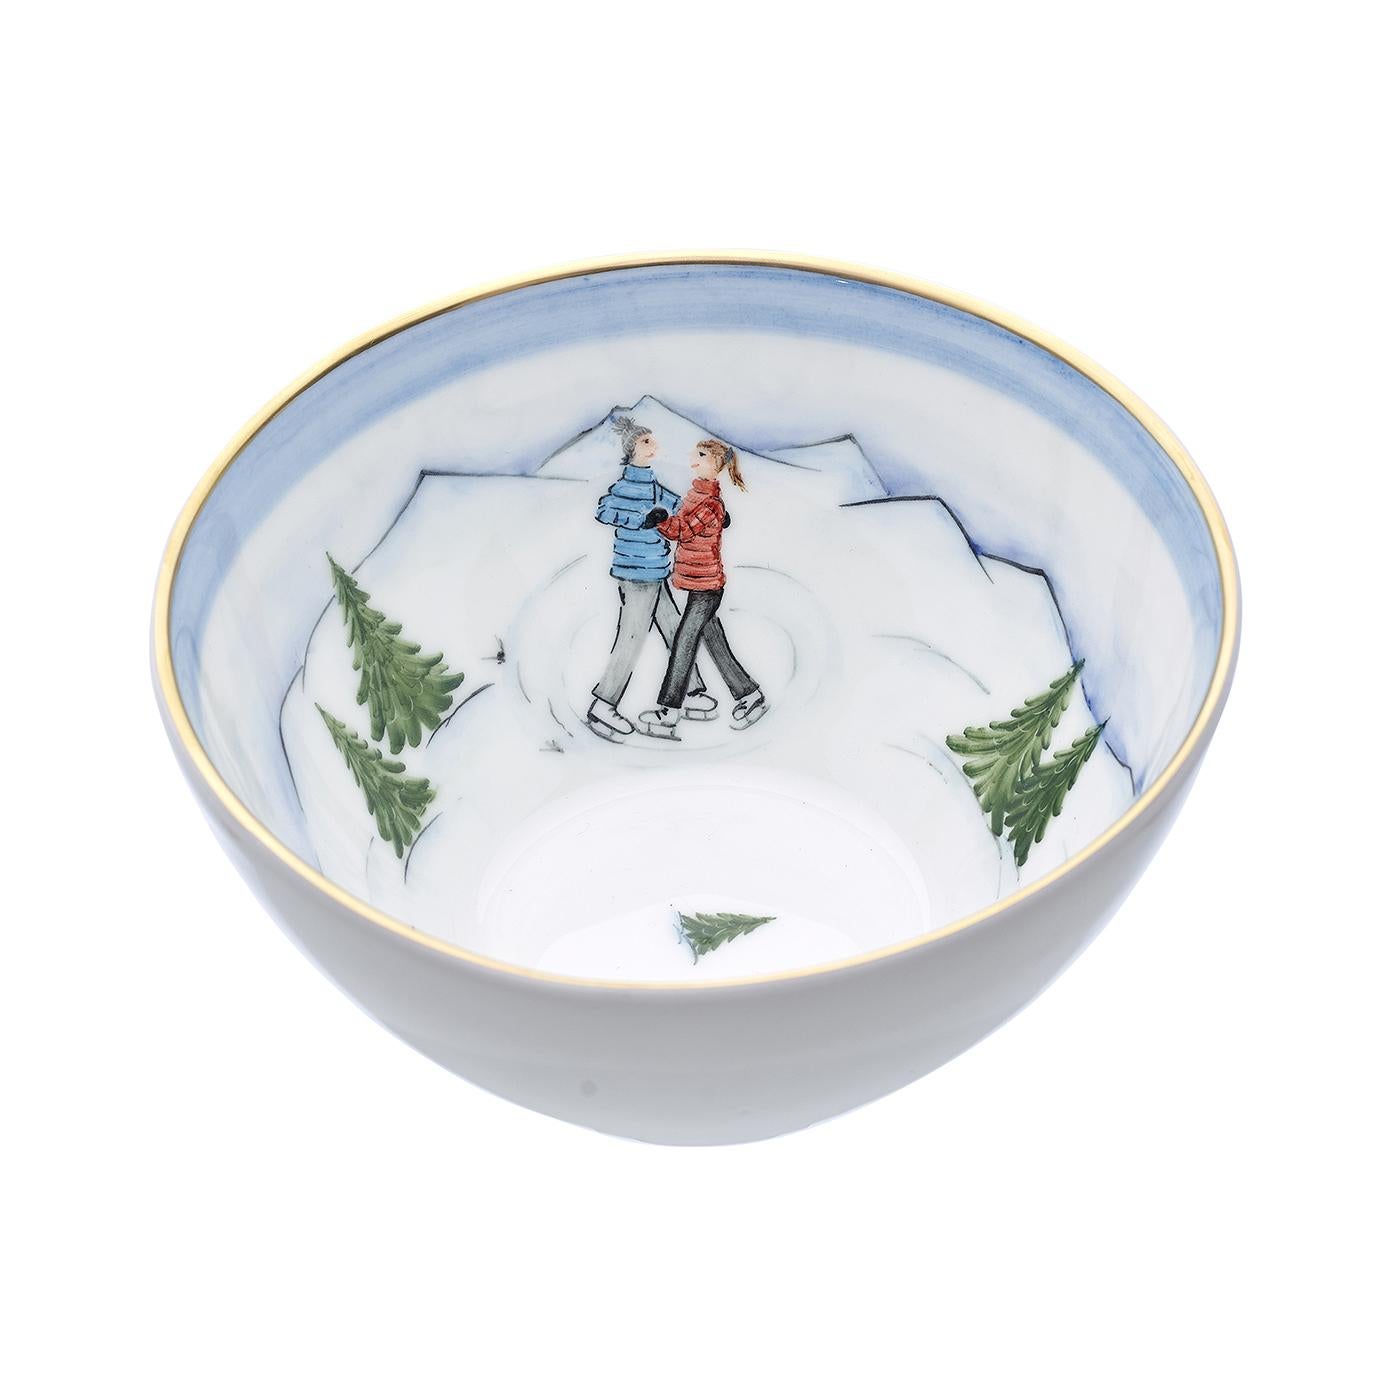 These completely handmade porcelain bowls are painted by hand with a charming hands-free winter decor . The decor comes as a set of three designs. One shows a boy on a sladder, the other bowl is hands-free painted with a pair of ice skater. The